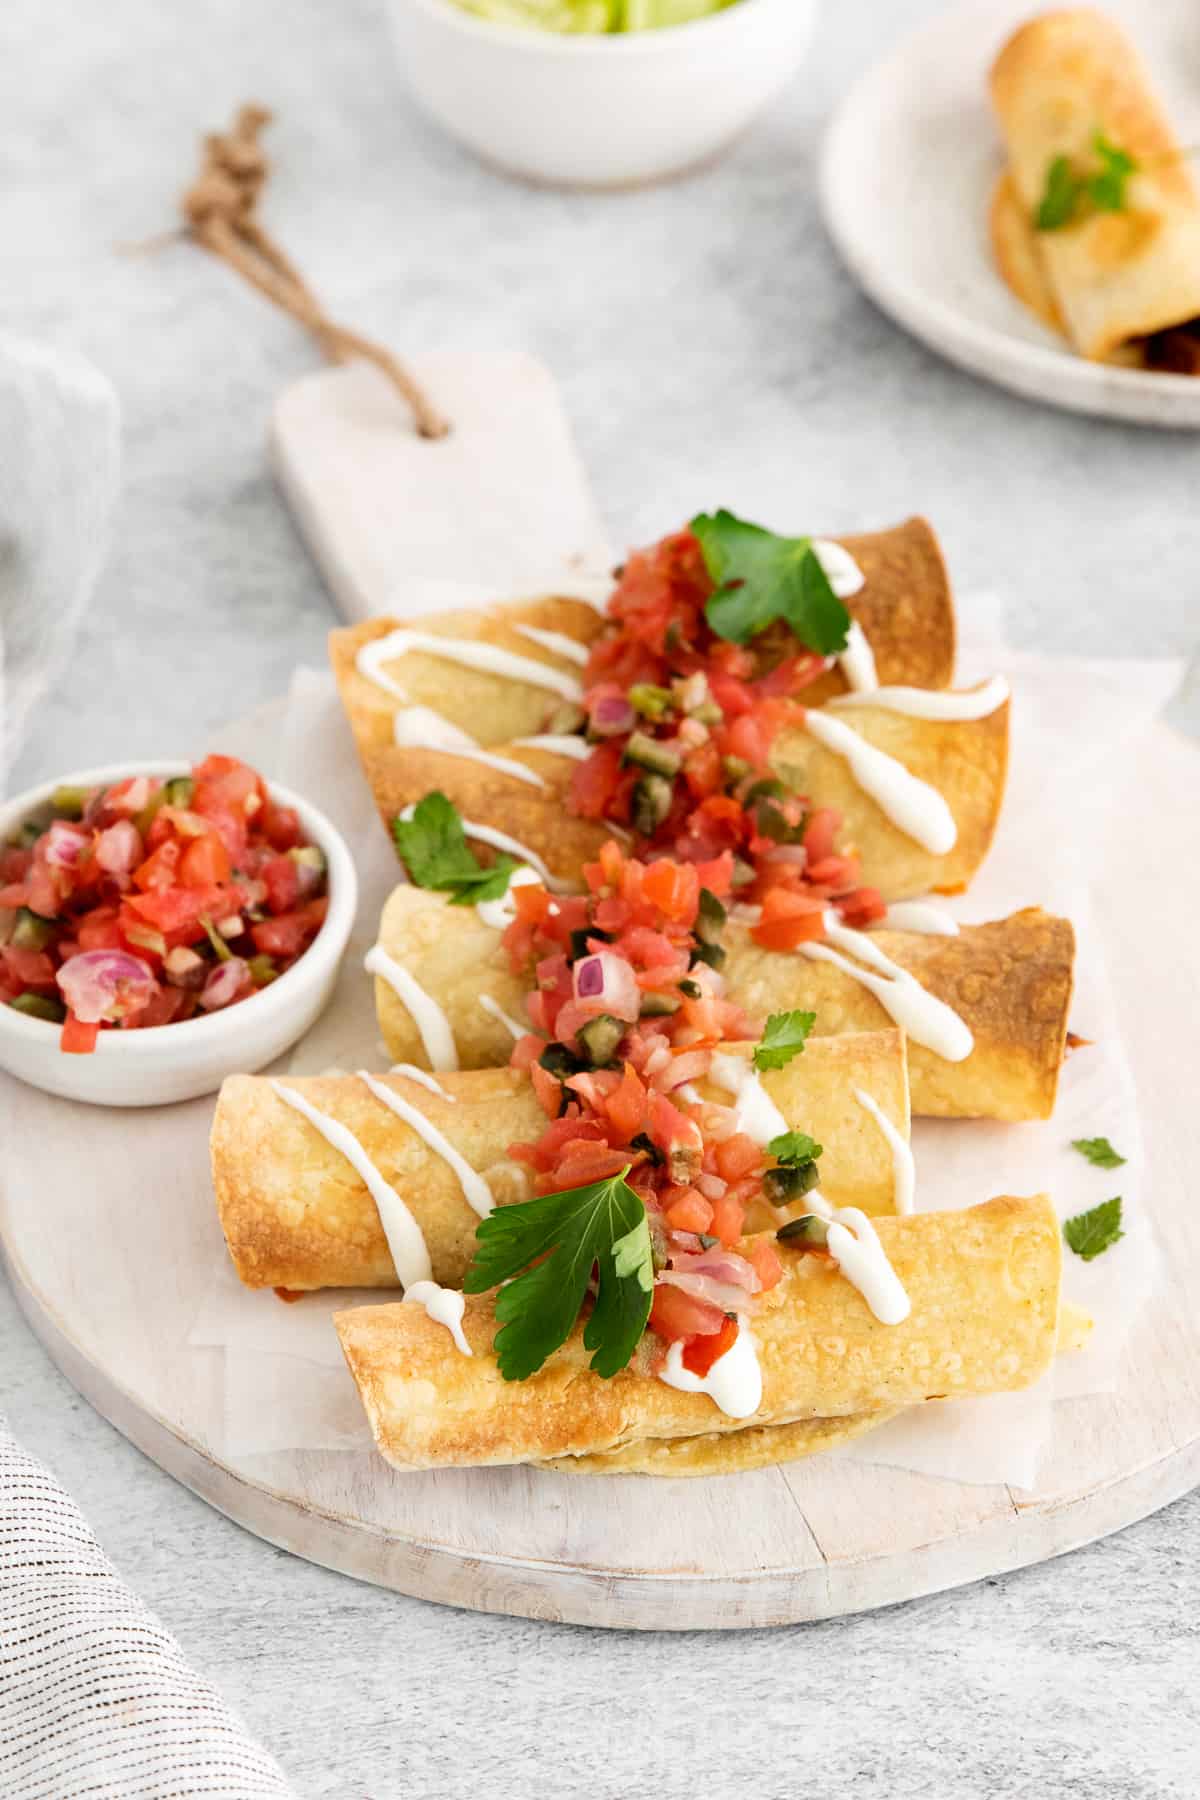 Taquitos topped with pico de gallo on a cutting board.